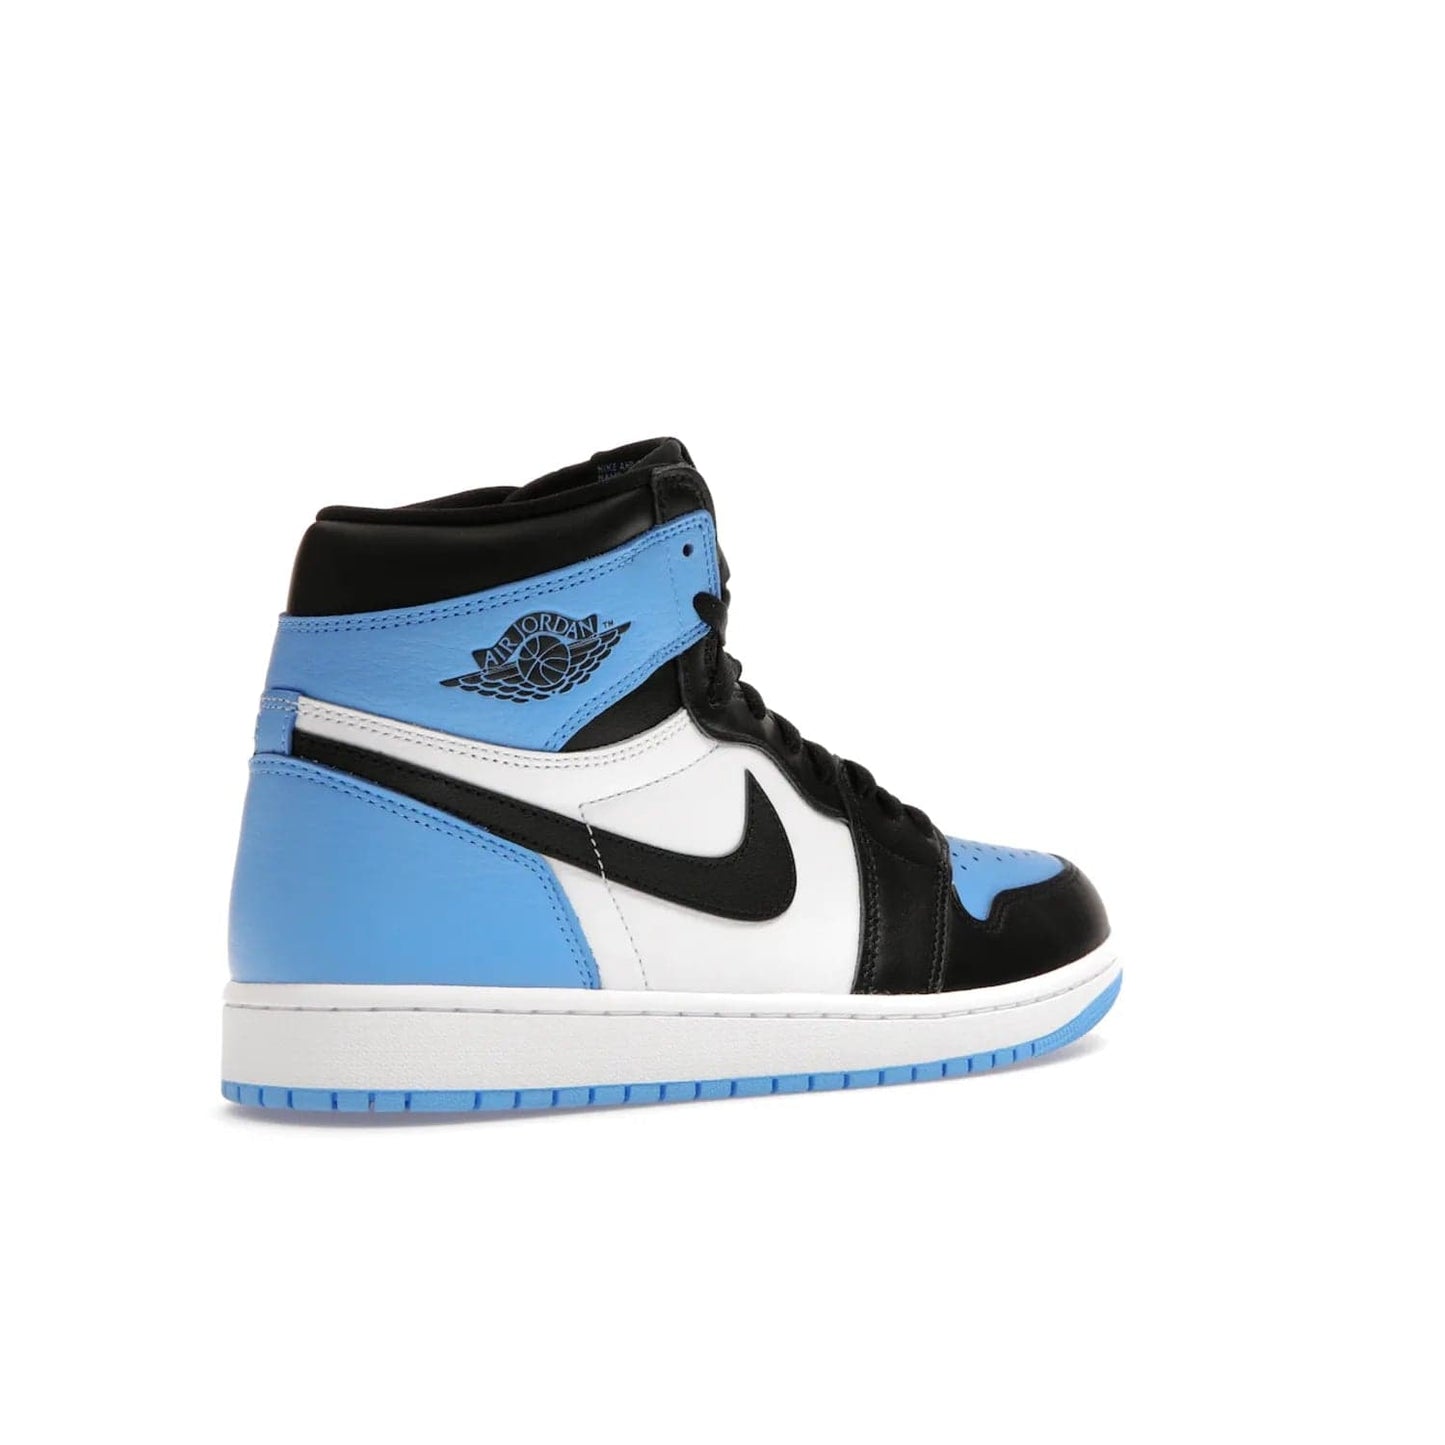 Jordan 1 Retro High OG UNC Toe - Image 33 - Only at www.BallersClubKickz.com - Jordan 1 High OG UNC Toe is a fashionable, high-quality sneaker featuring University Blue, Black White and White. Releasing July 22, 2023, it's the perfect pick up for sneakerheads.